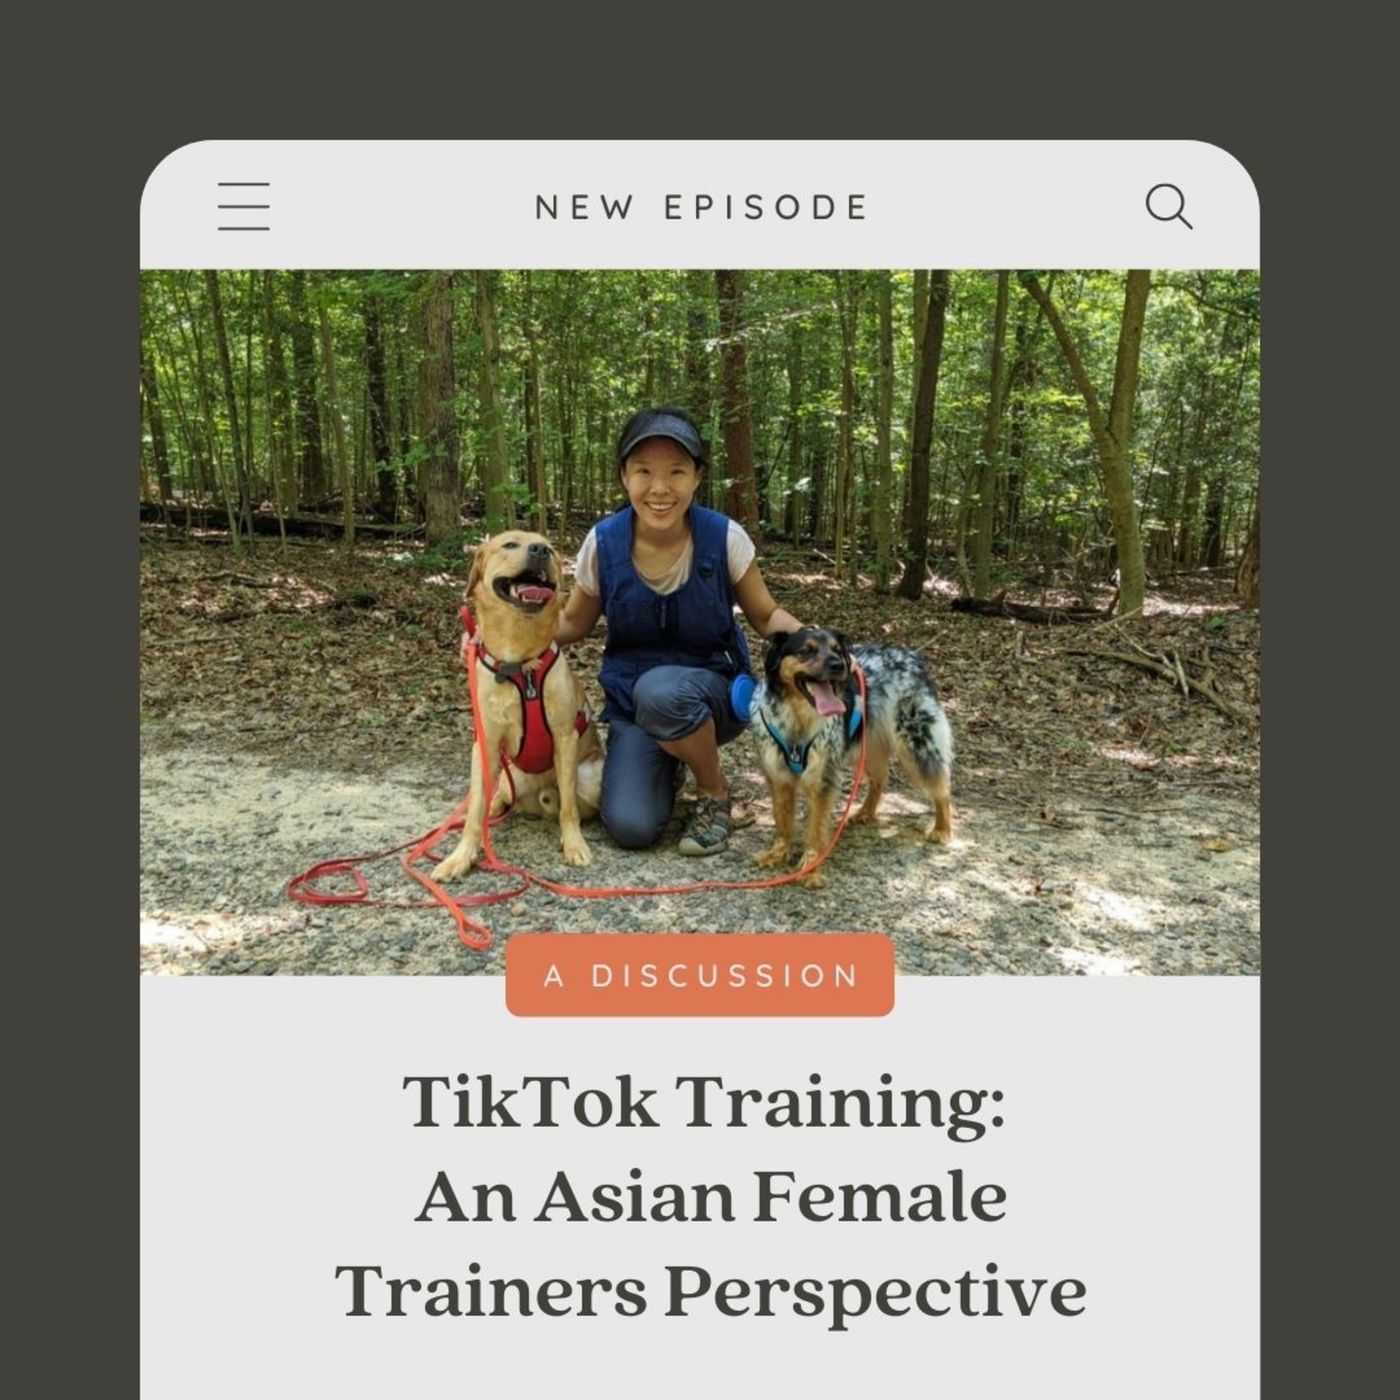 TikTok Training: An Asian Female Trainers Perspective